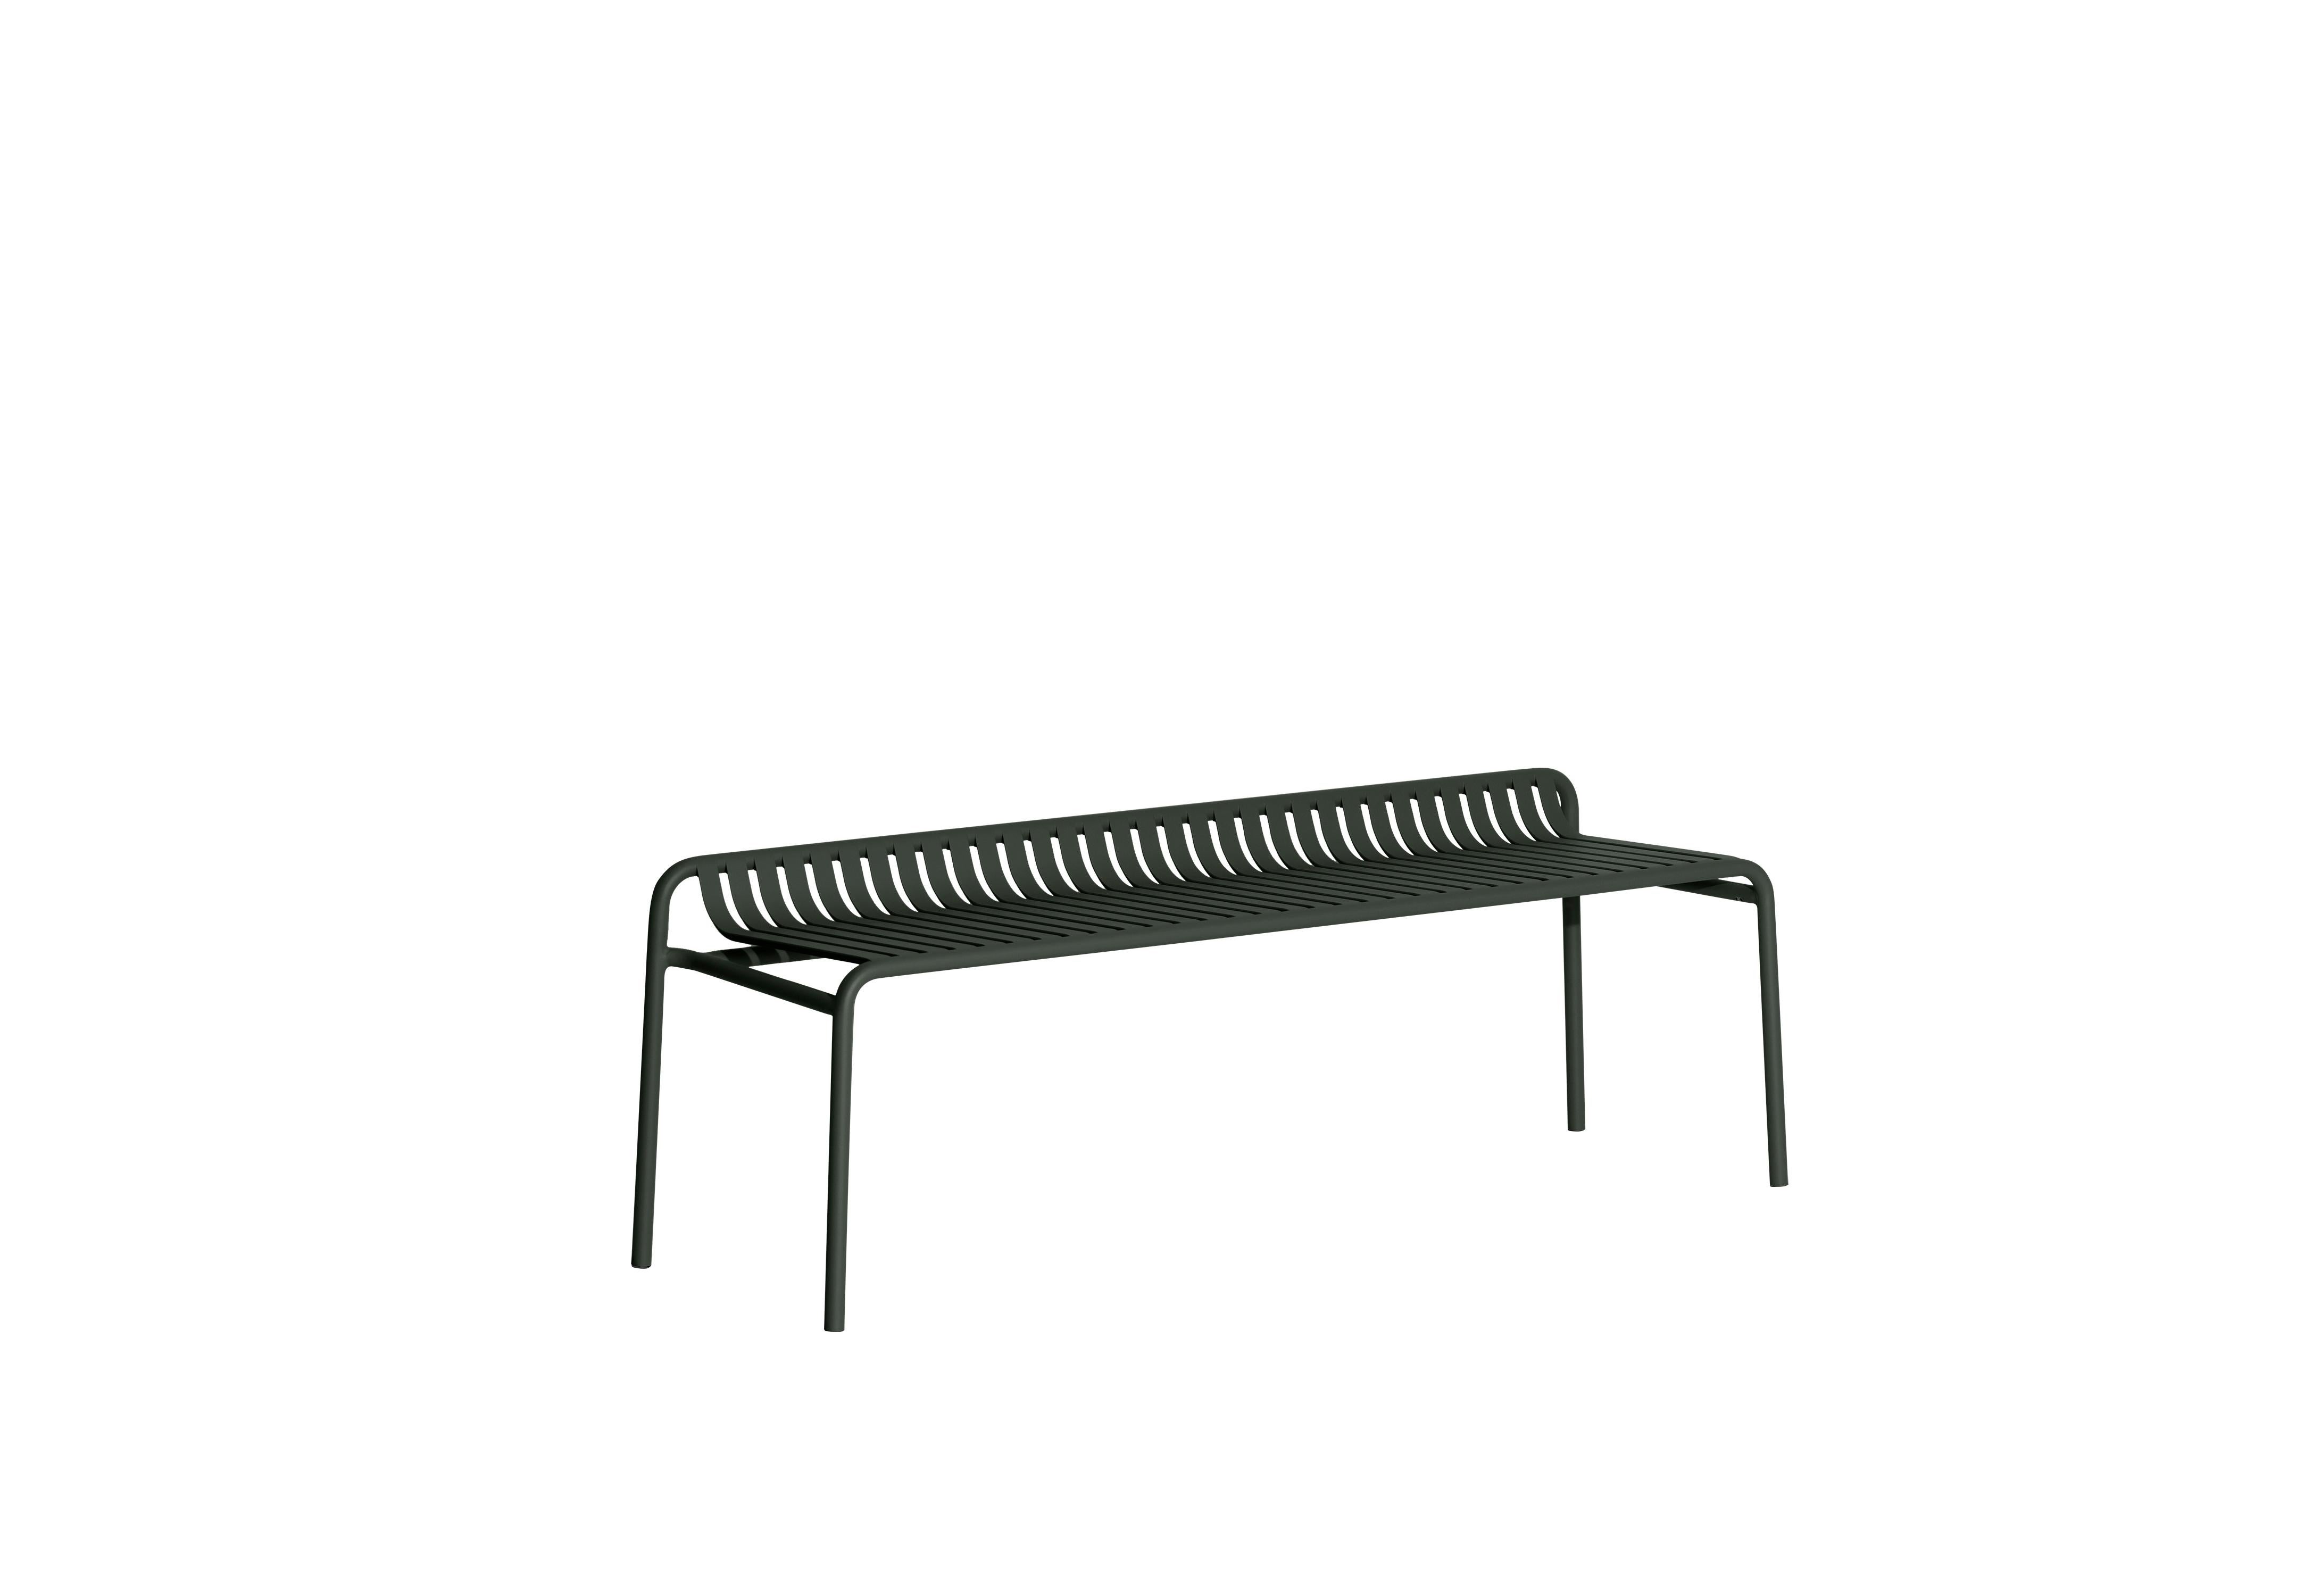 Petite Friture Week-End Bench without Back in Glass Green Aluminium by Studio BrichetZiegler, 2017

The week-end collection is a full range of outdoor furniture, in aluminium grained epoxy paint, matt finish, that includes 18 functions and 8